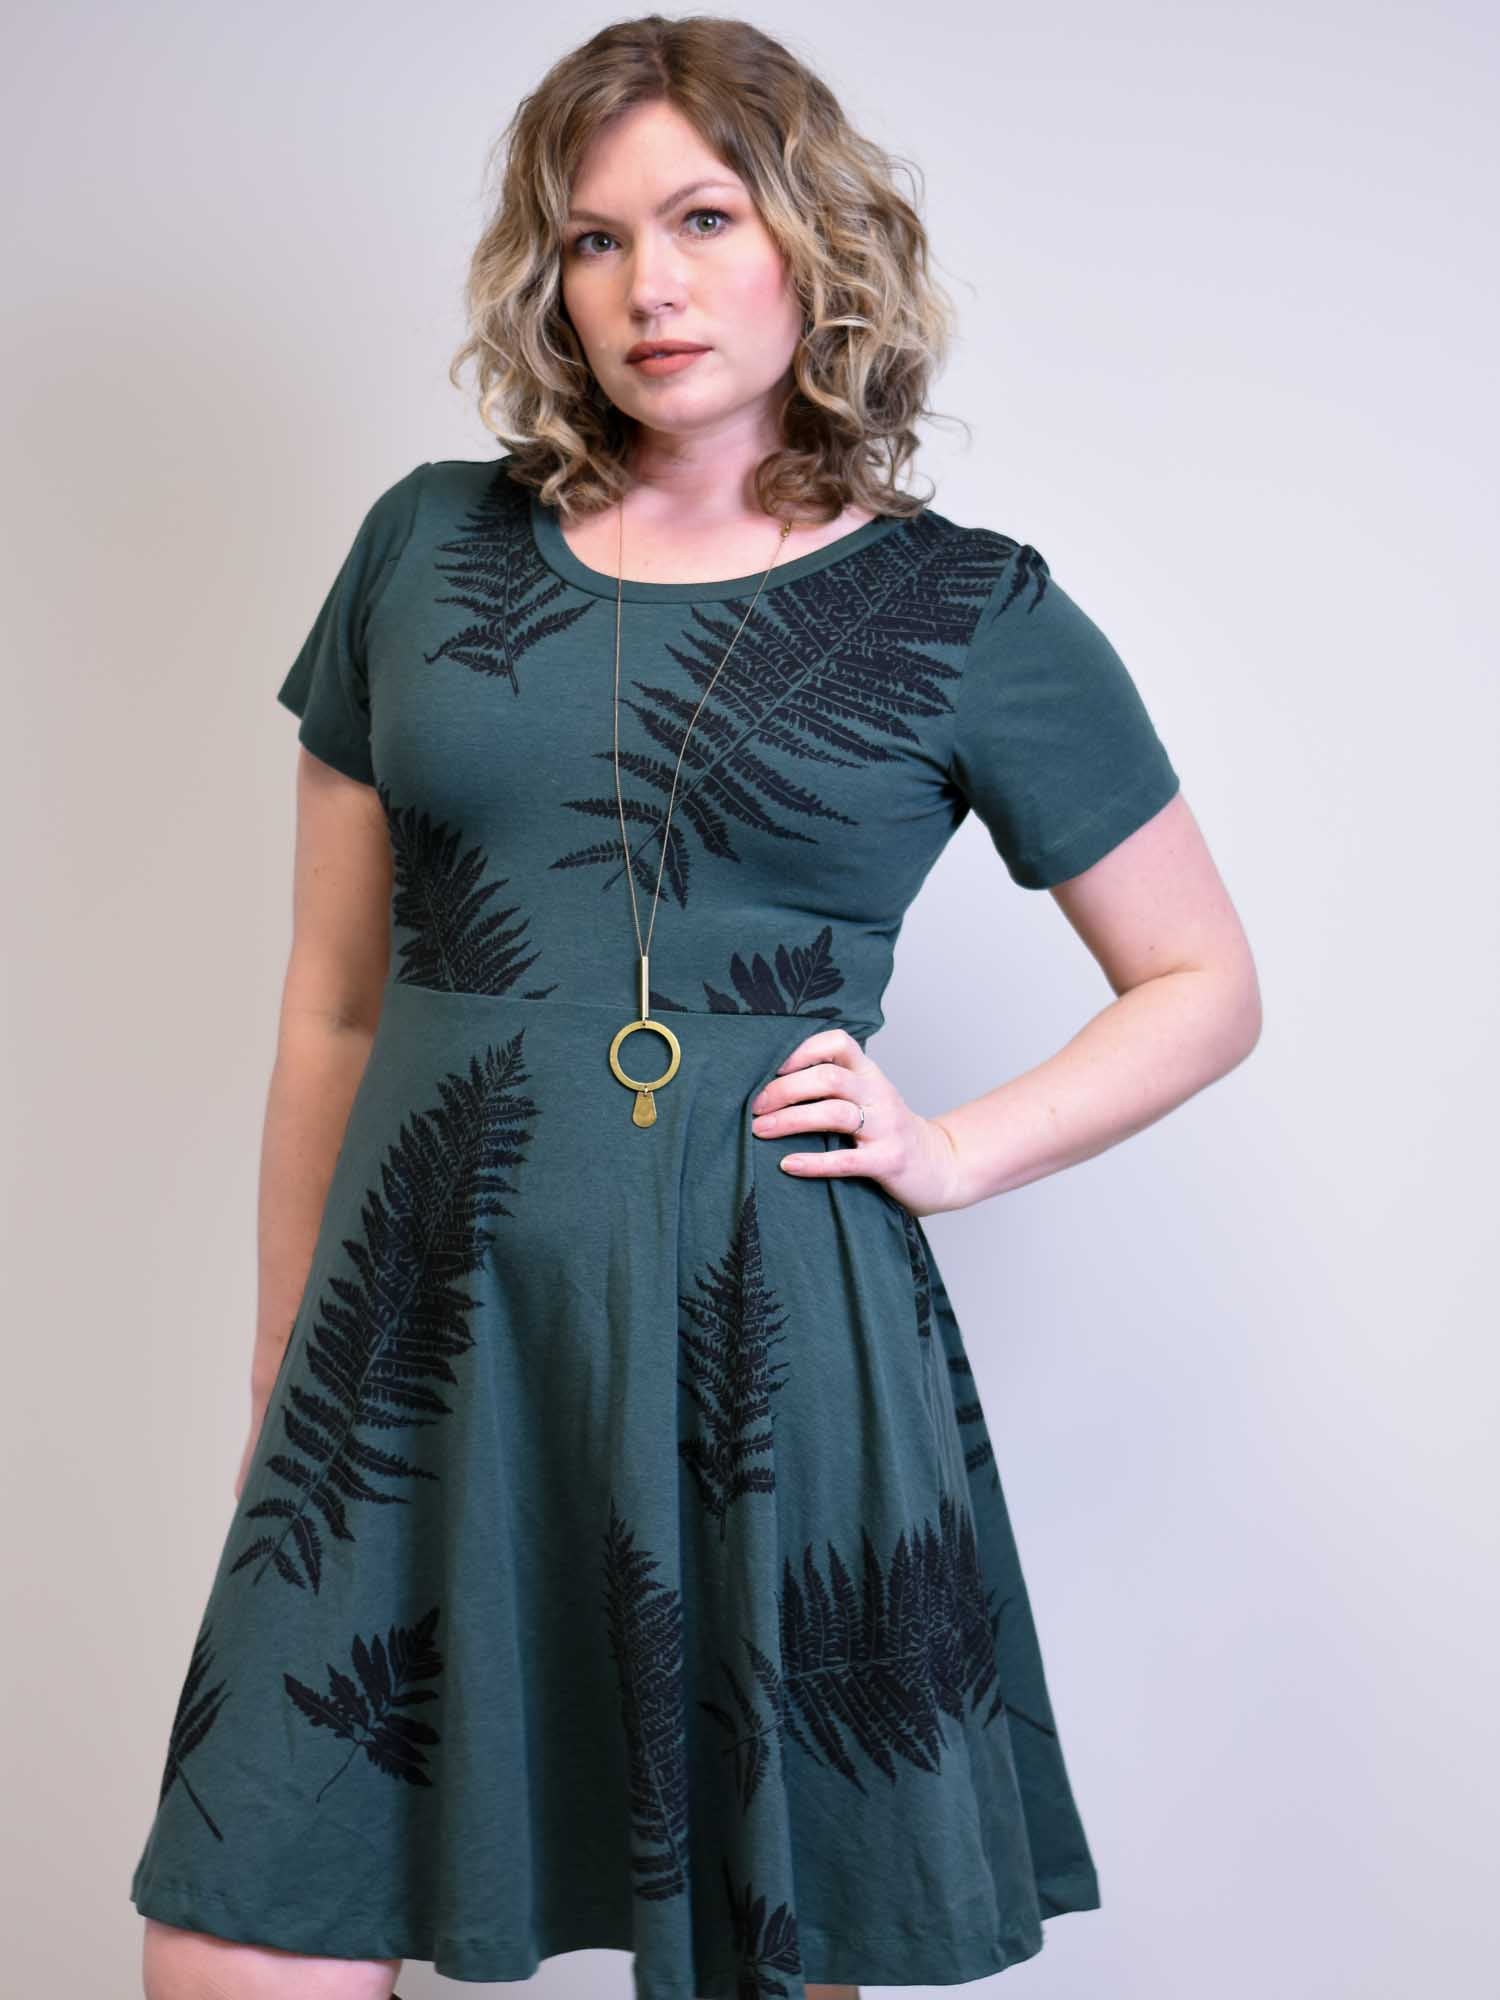 Friday Dress - Green with Ferns